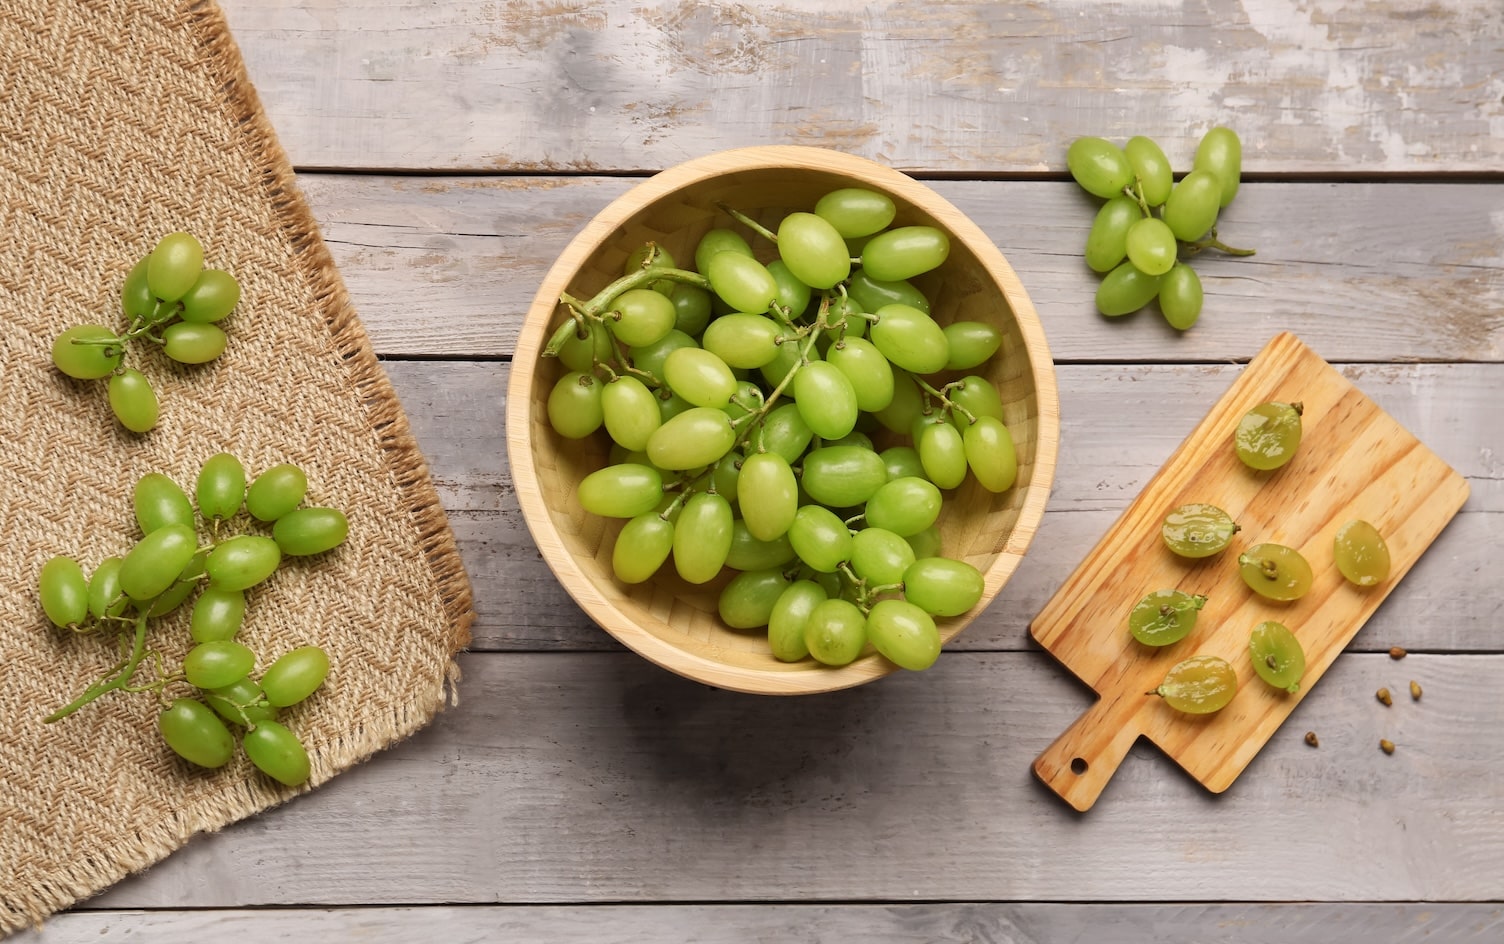 Are grapes as bad as candy bars? | MyFitnessPal